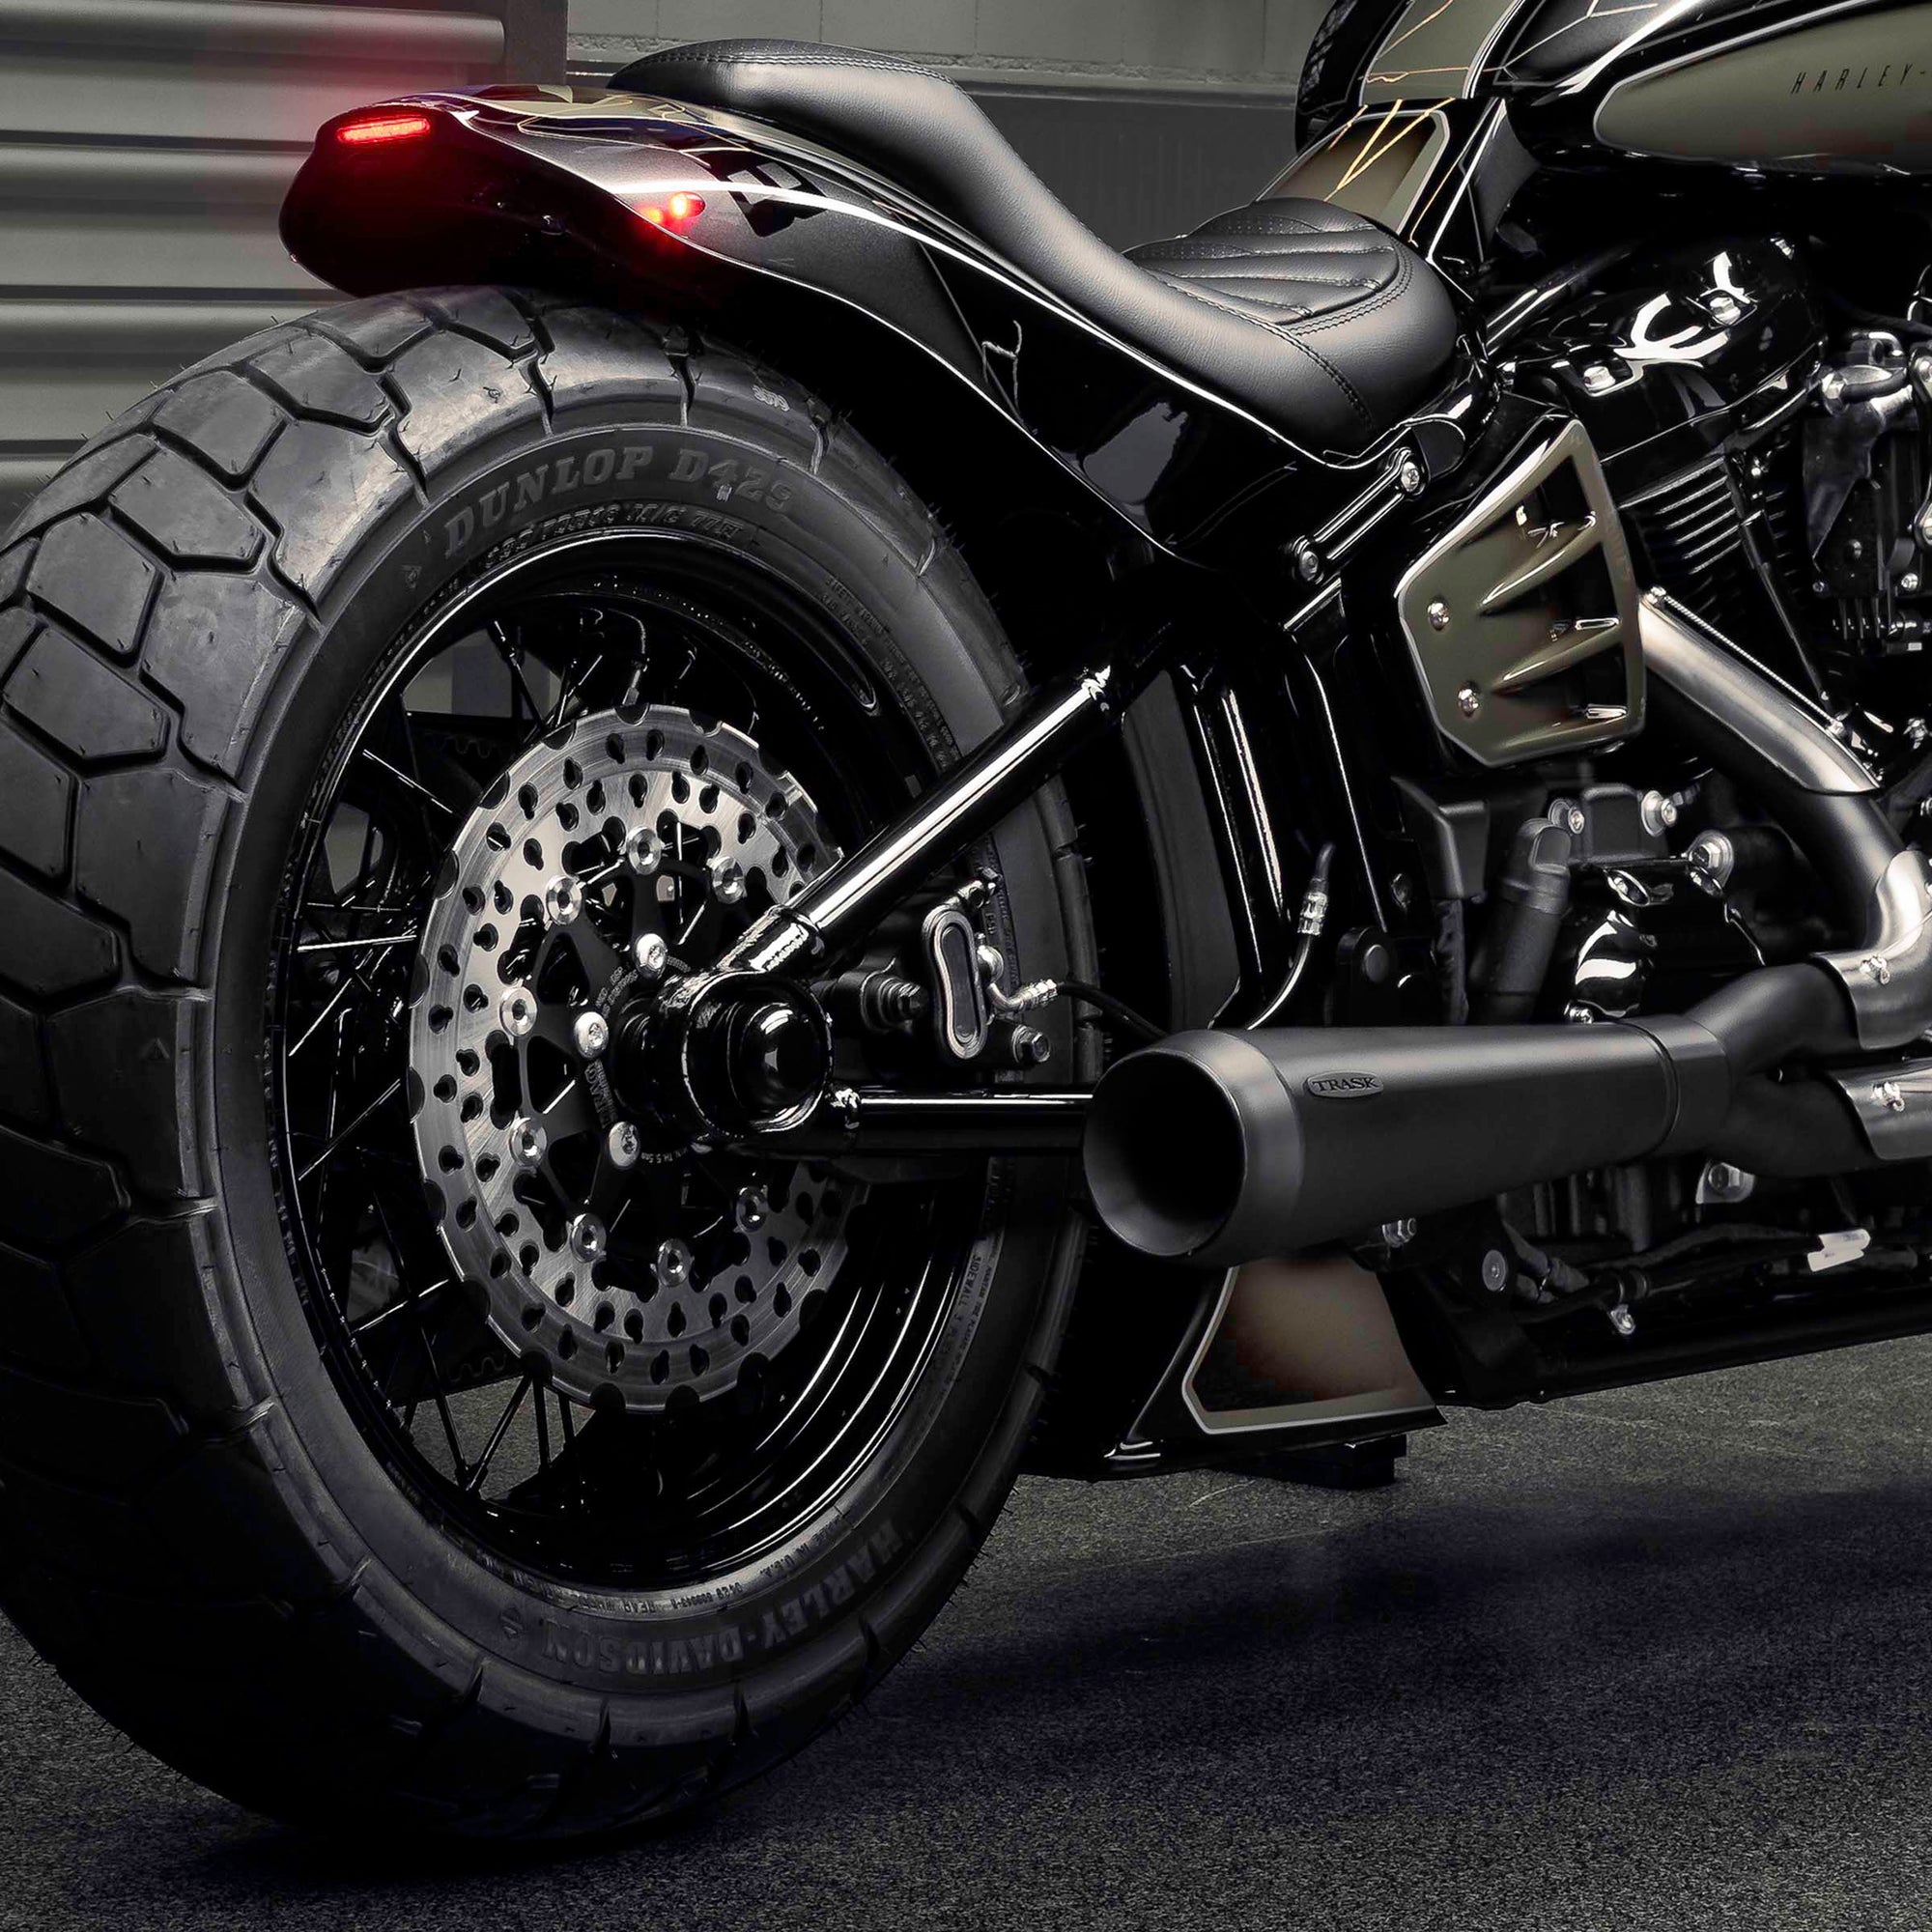 Zoomed Harley Davidson motorcycle with Killer Custom parts from the side 